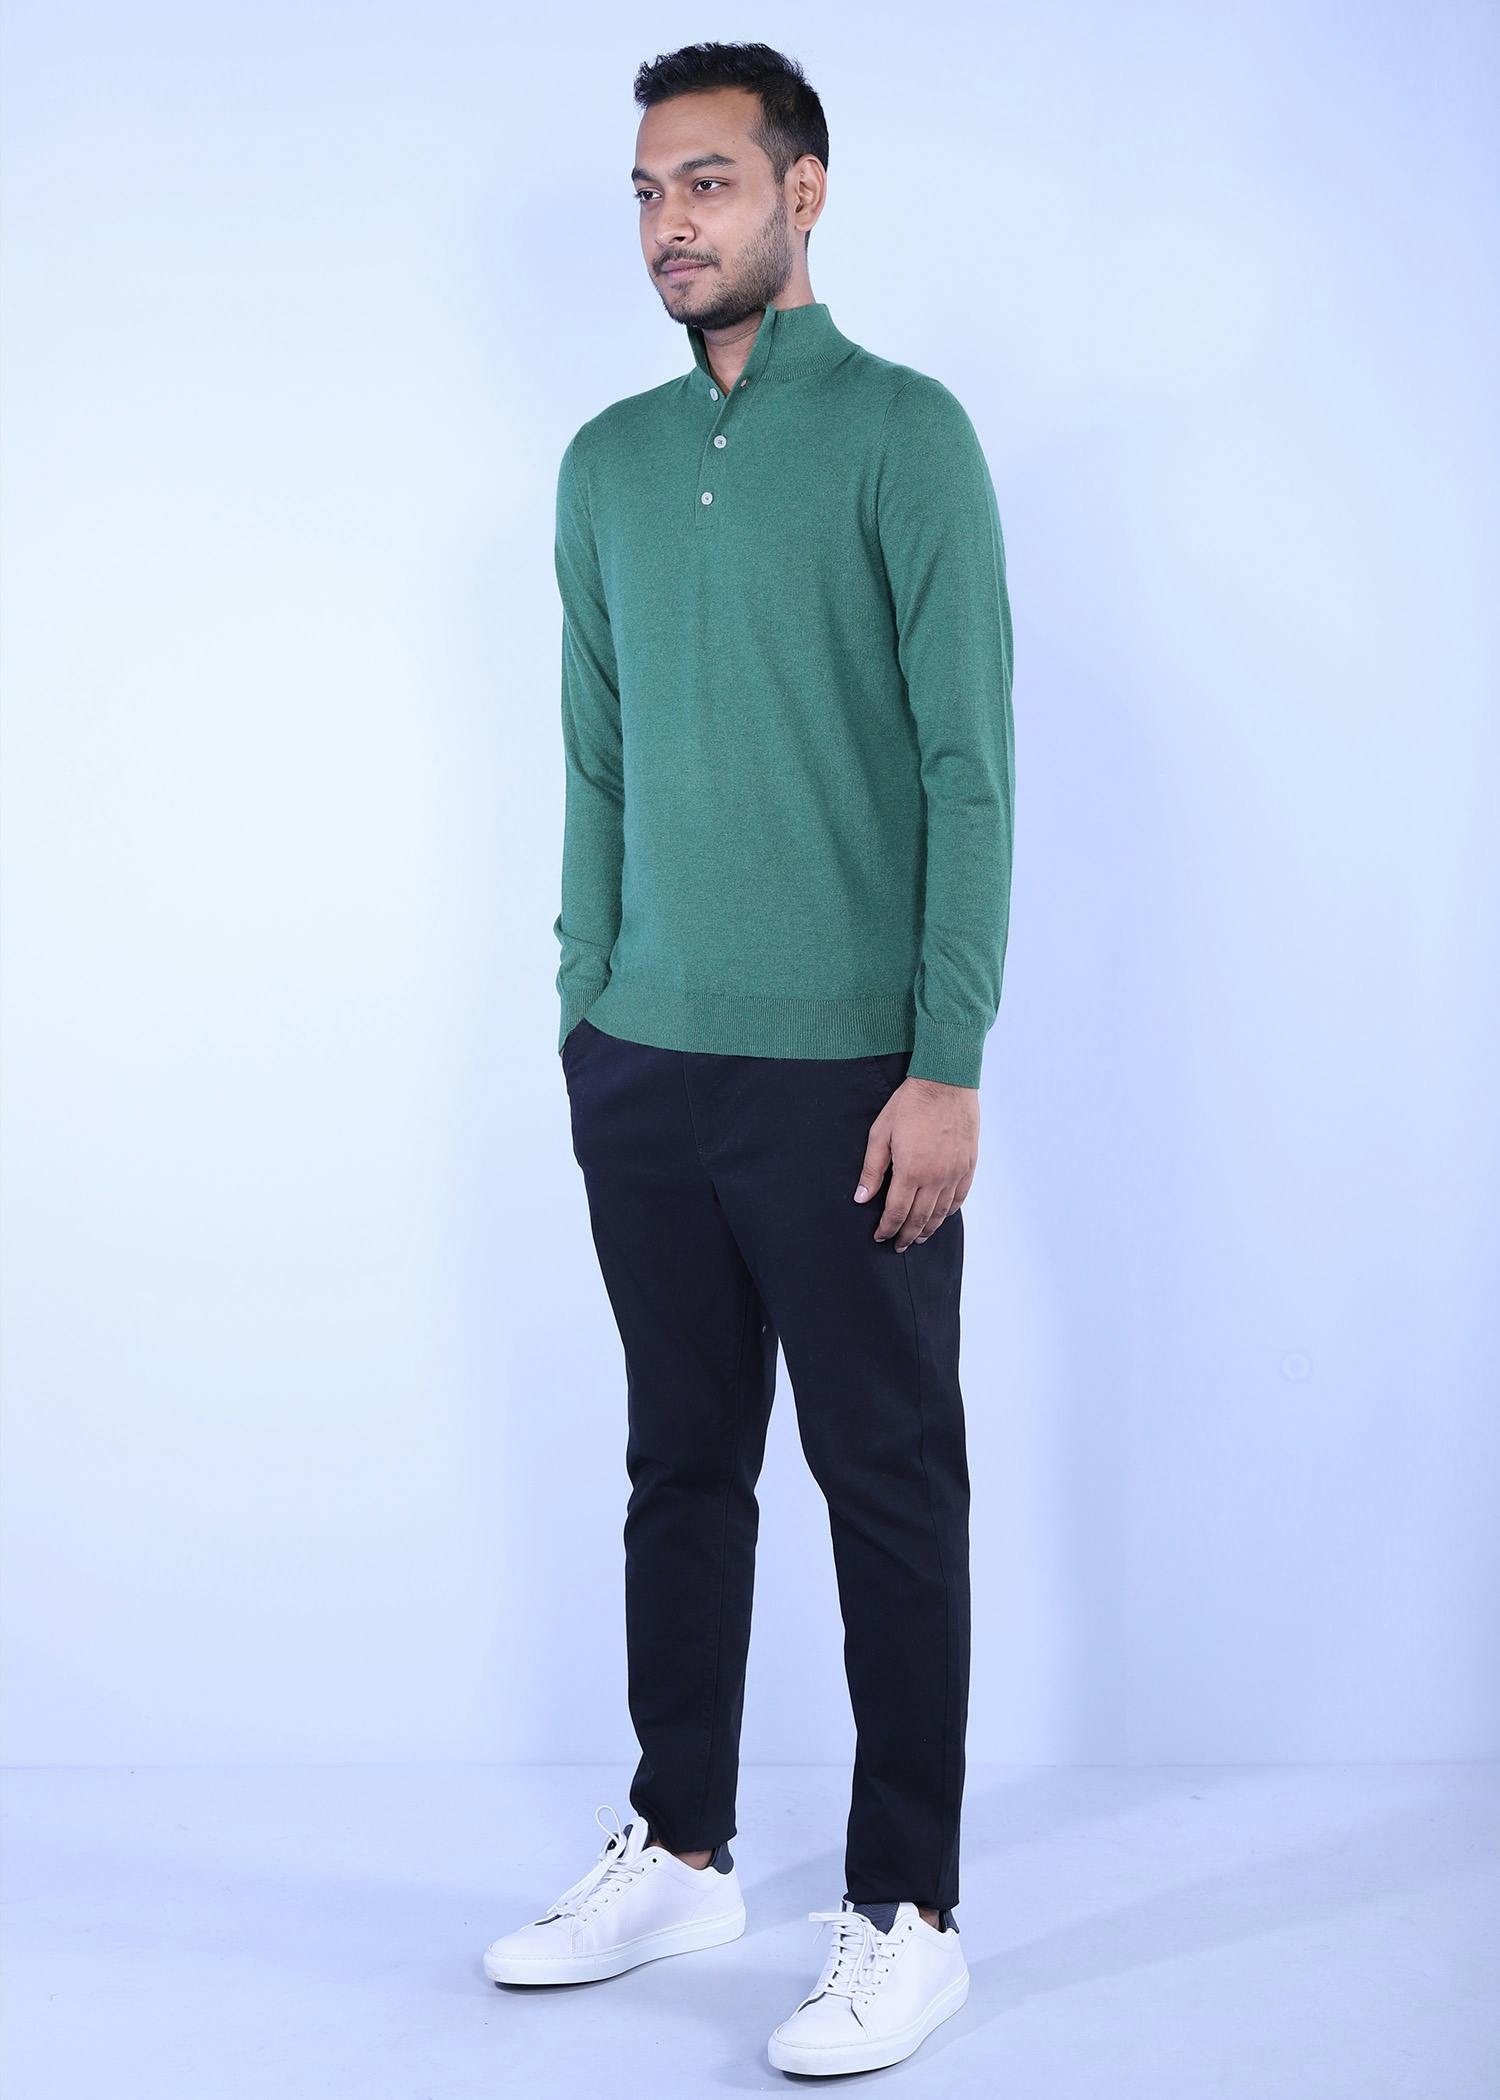 hornero i sweater green color side view